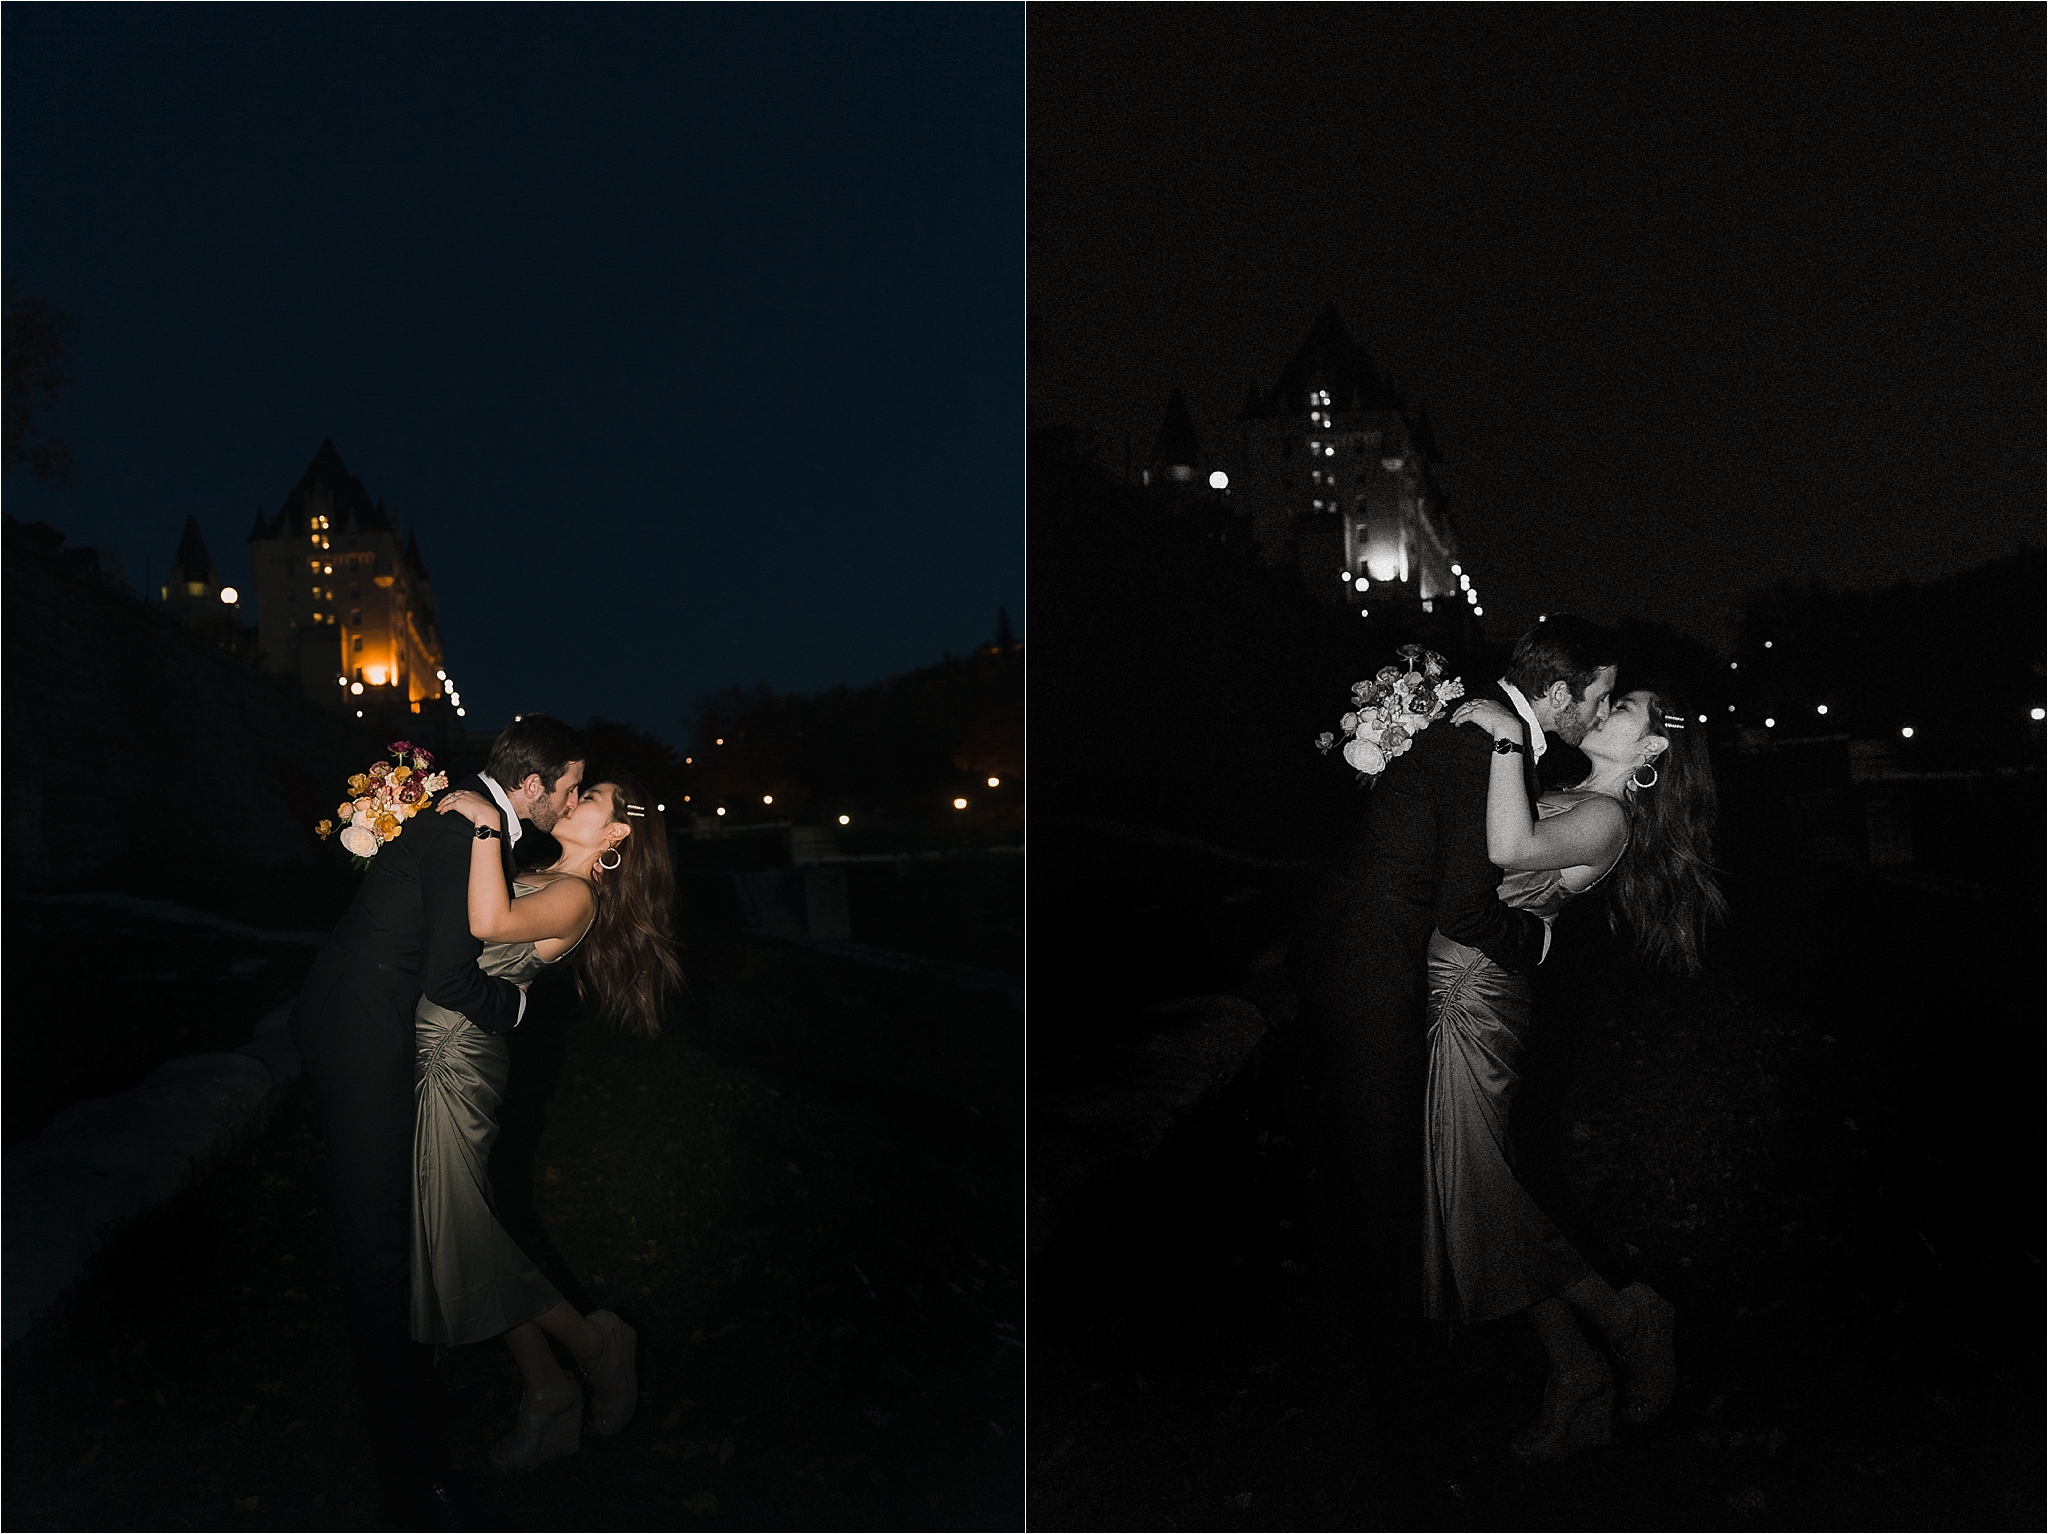 Downtown Ottawa elopement photo shoot ombre bouquet, Major's Hill Park, photography by Sonia V Photography